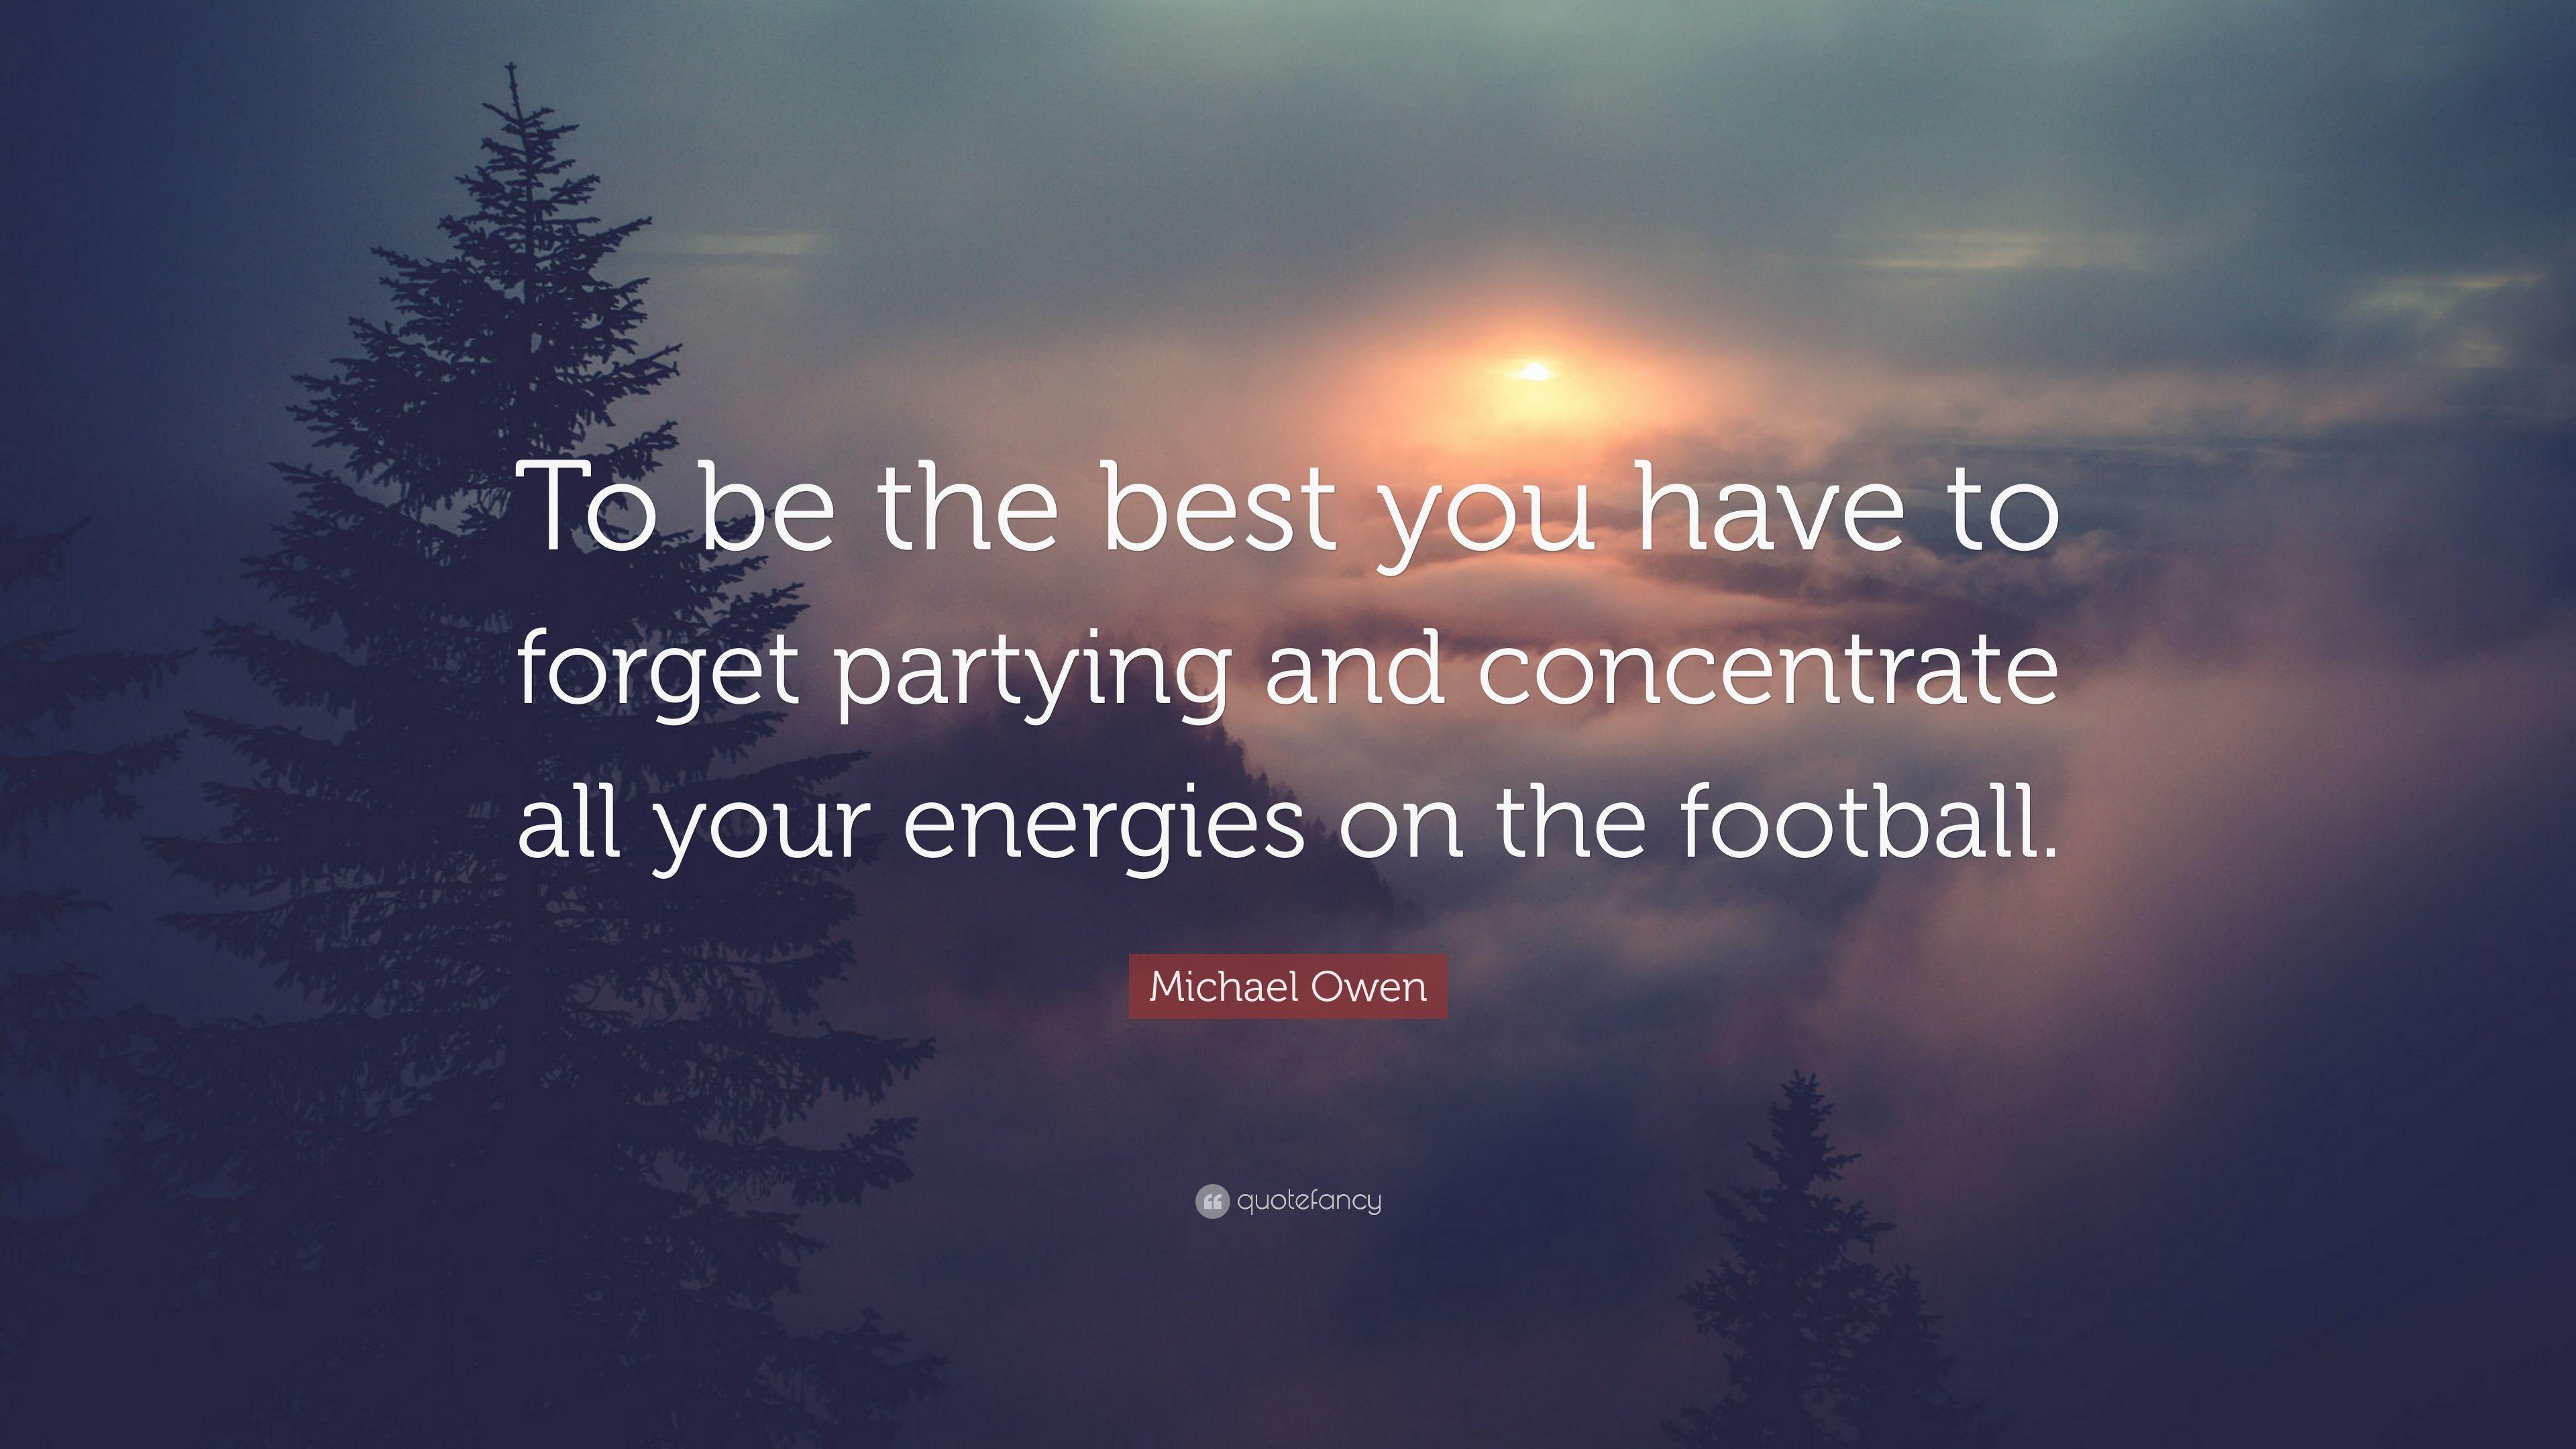 Michael Owen Quote: “To be the best you have to forget